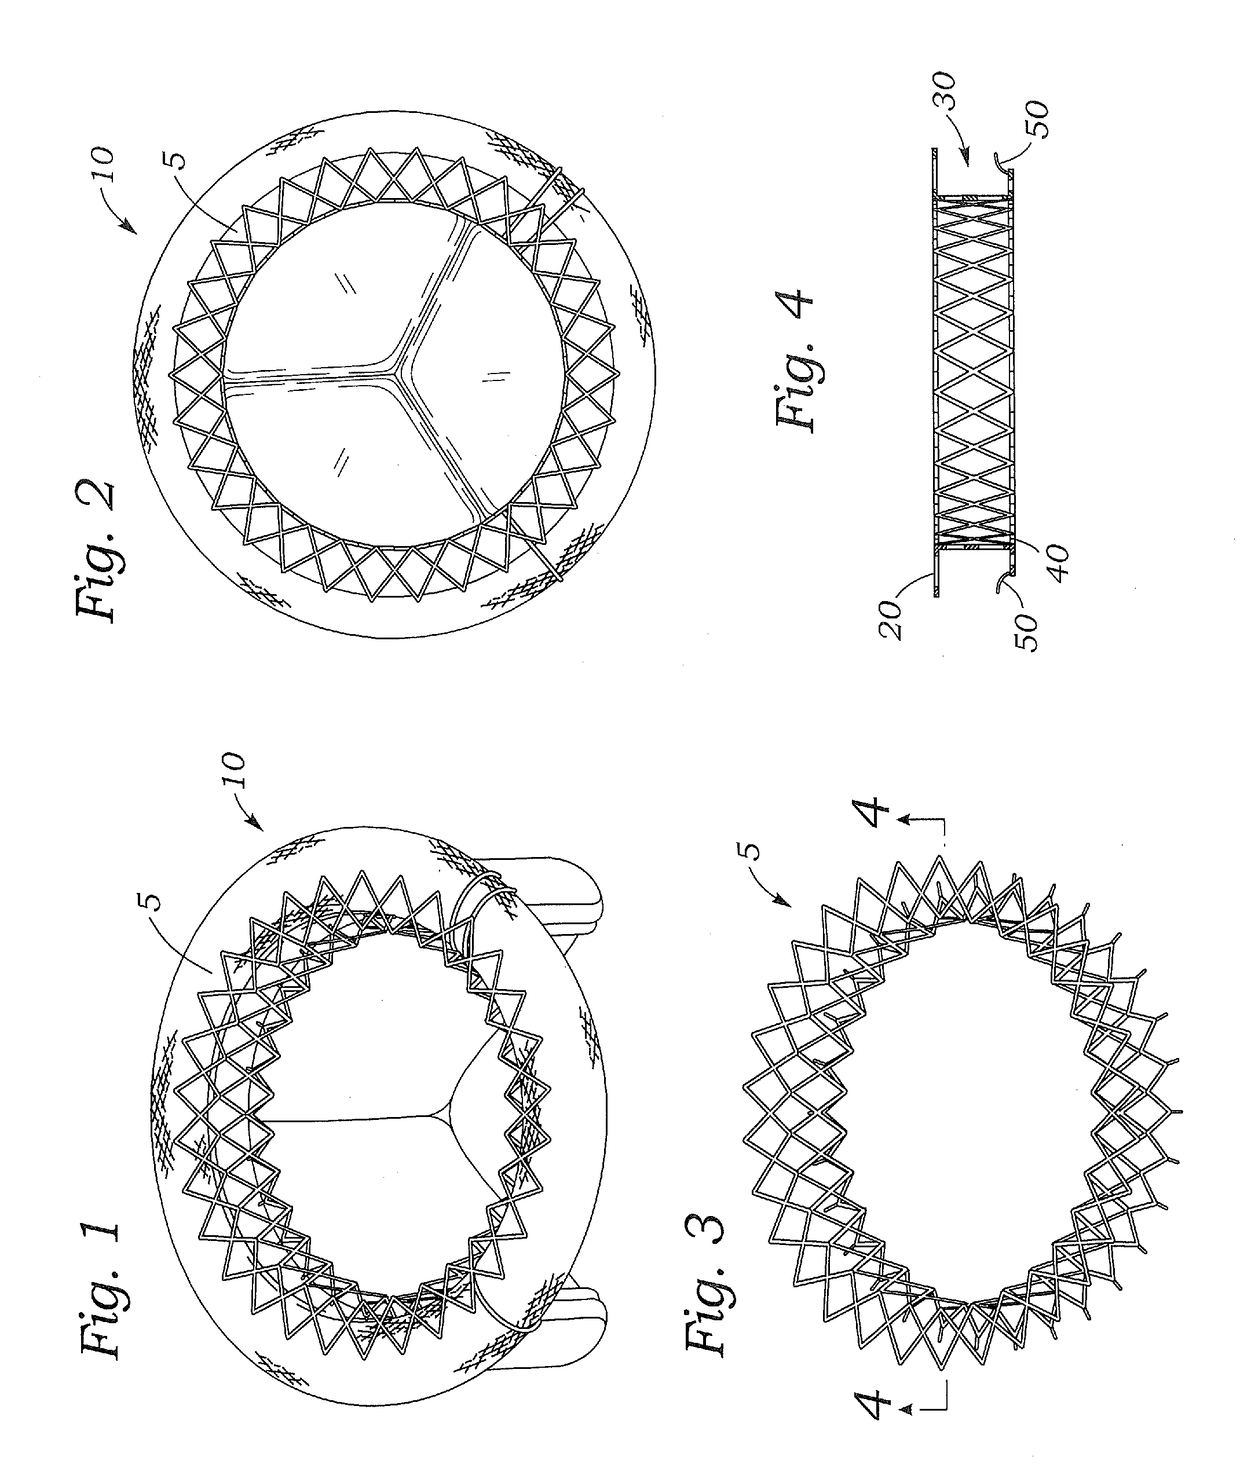 Spacer for securing a transcatheter valve to a bioprosthetic cardiac structure